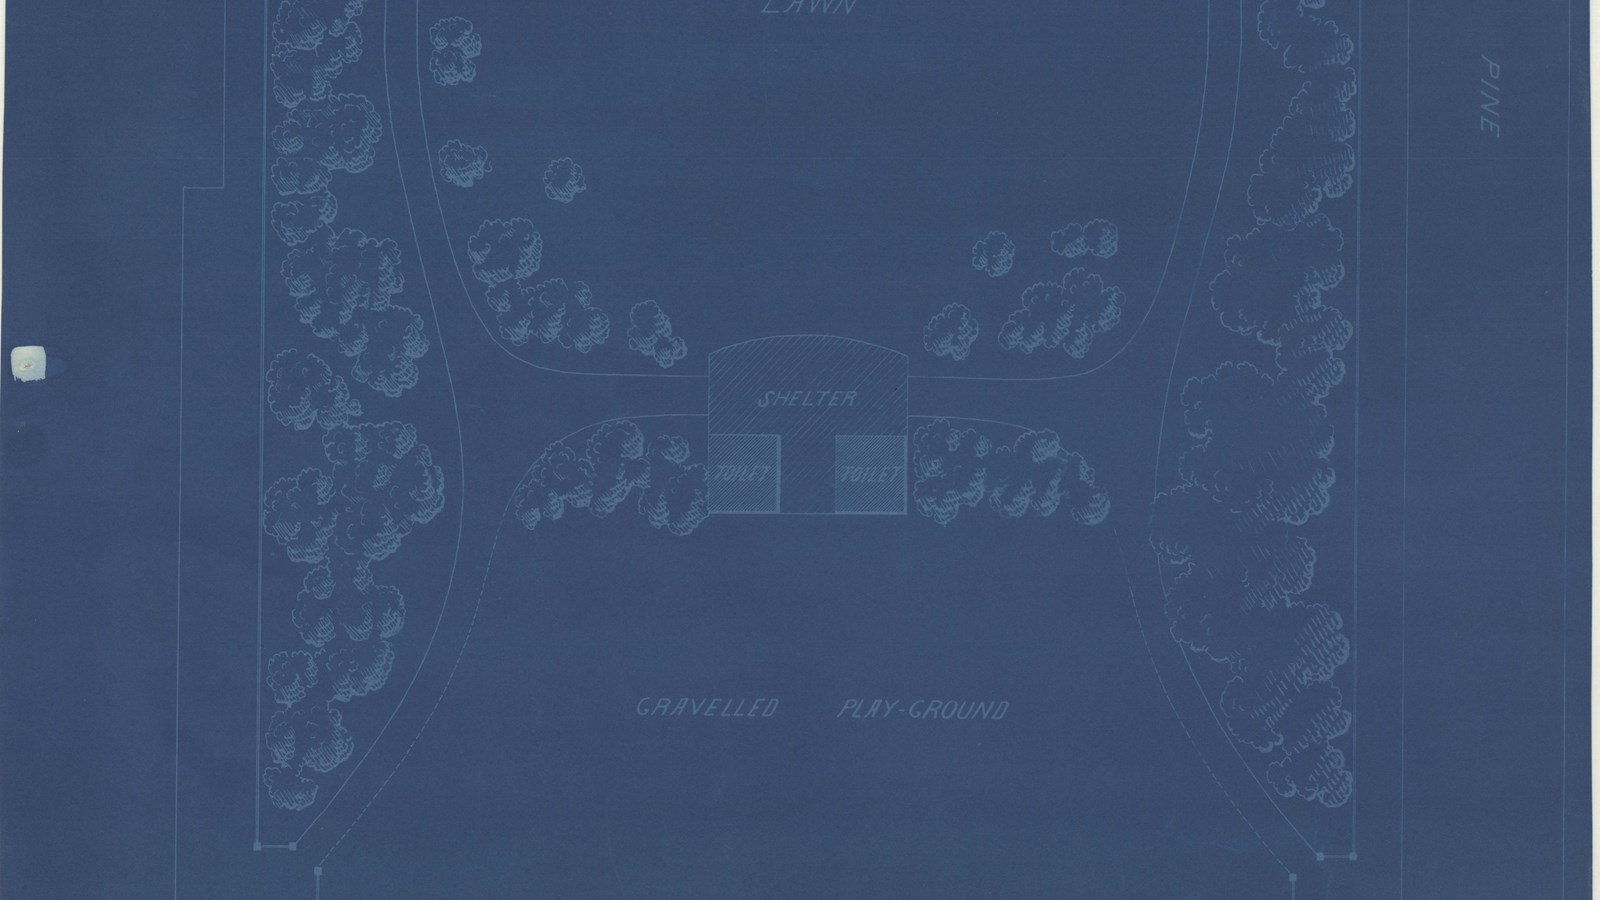 Blueprint of rectangular park with curving paths through it and lined with trees